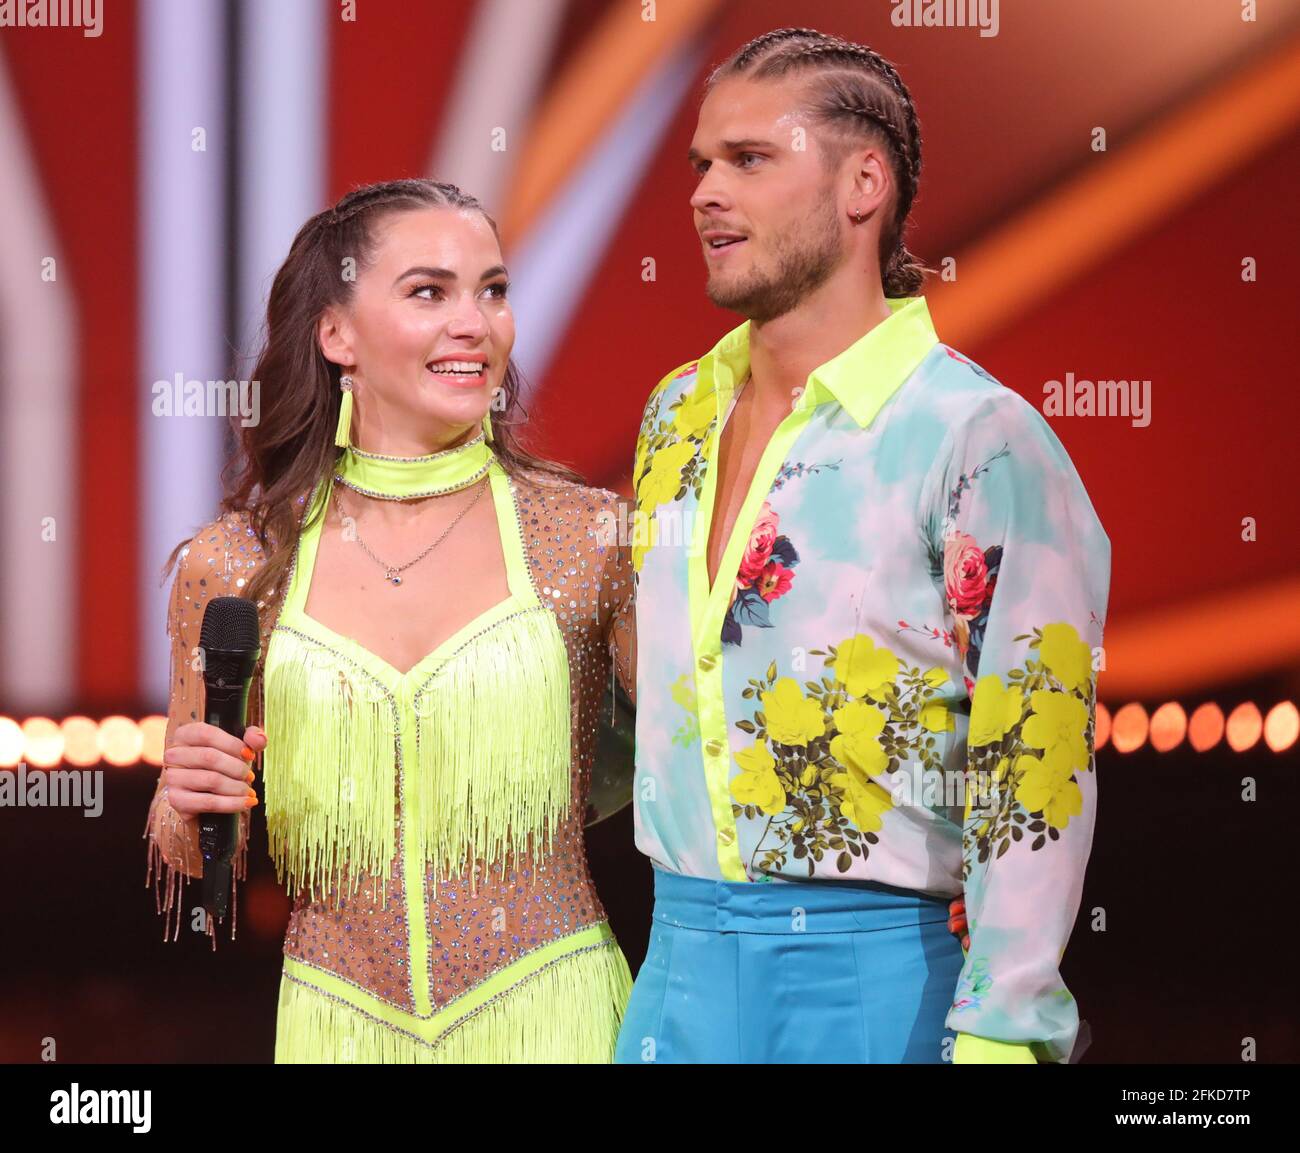 Cologne, Germany. 30th Apr, 2021. Rurik Gislason, footballer, and Renata Lusin, professional dancer, after their dance during the 8th show of the 14th season of the RTL dance show 'Let's Dance'. Credit: Joshua Sammer/Getty/POOL/dpa/Alamy Live News Stock Photo